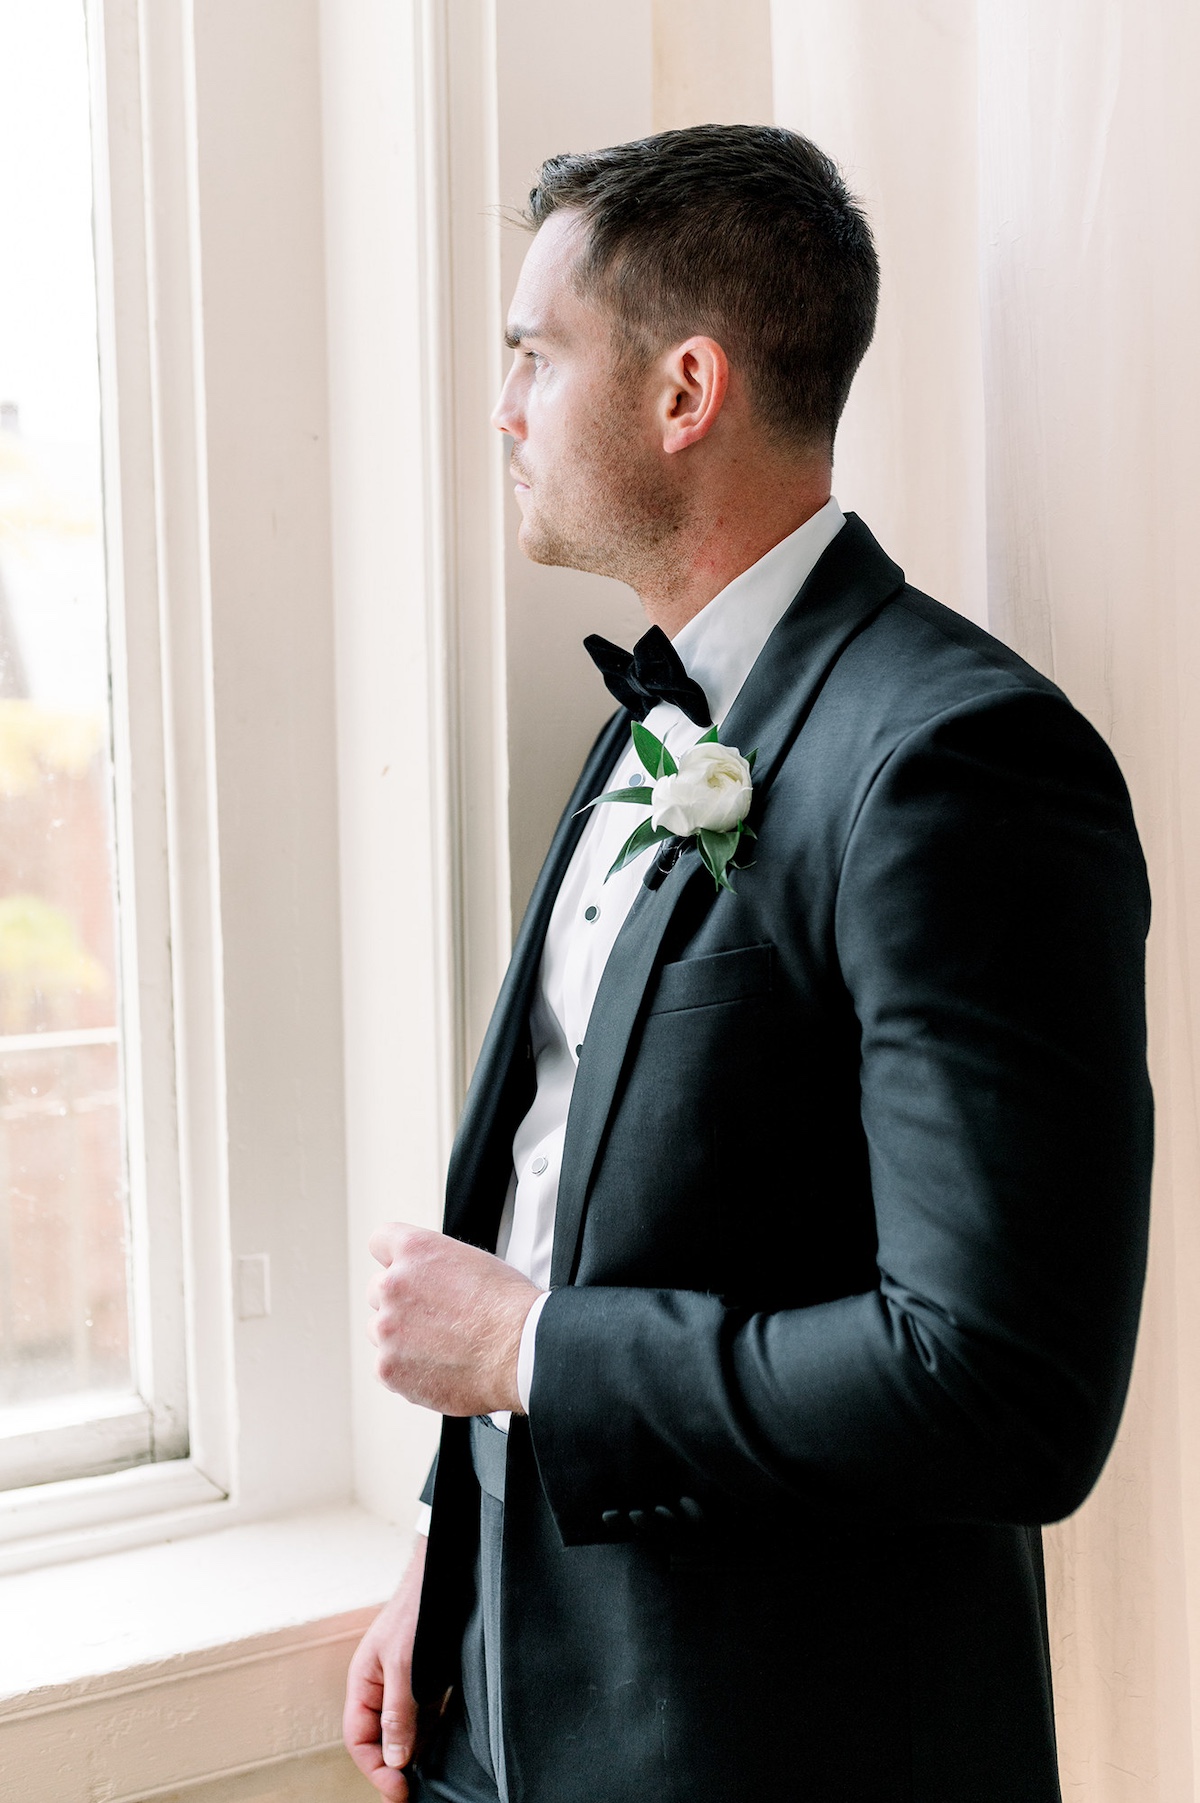 A reflective editorial moment featuring the groom, expressing a blend of contemplation and high-end sophistication.